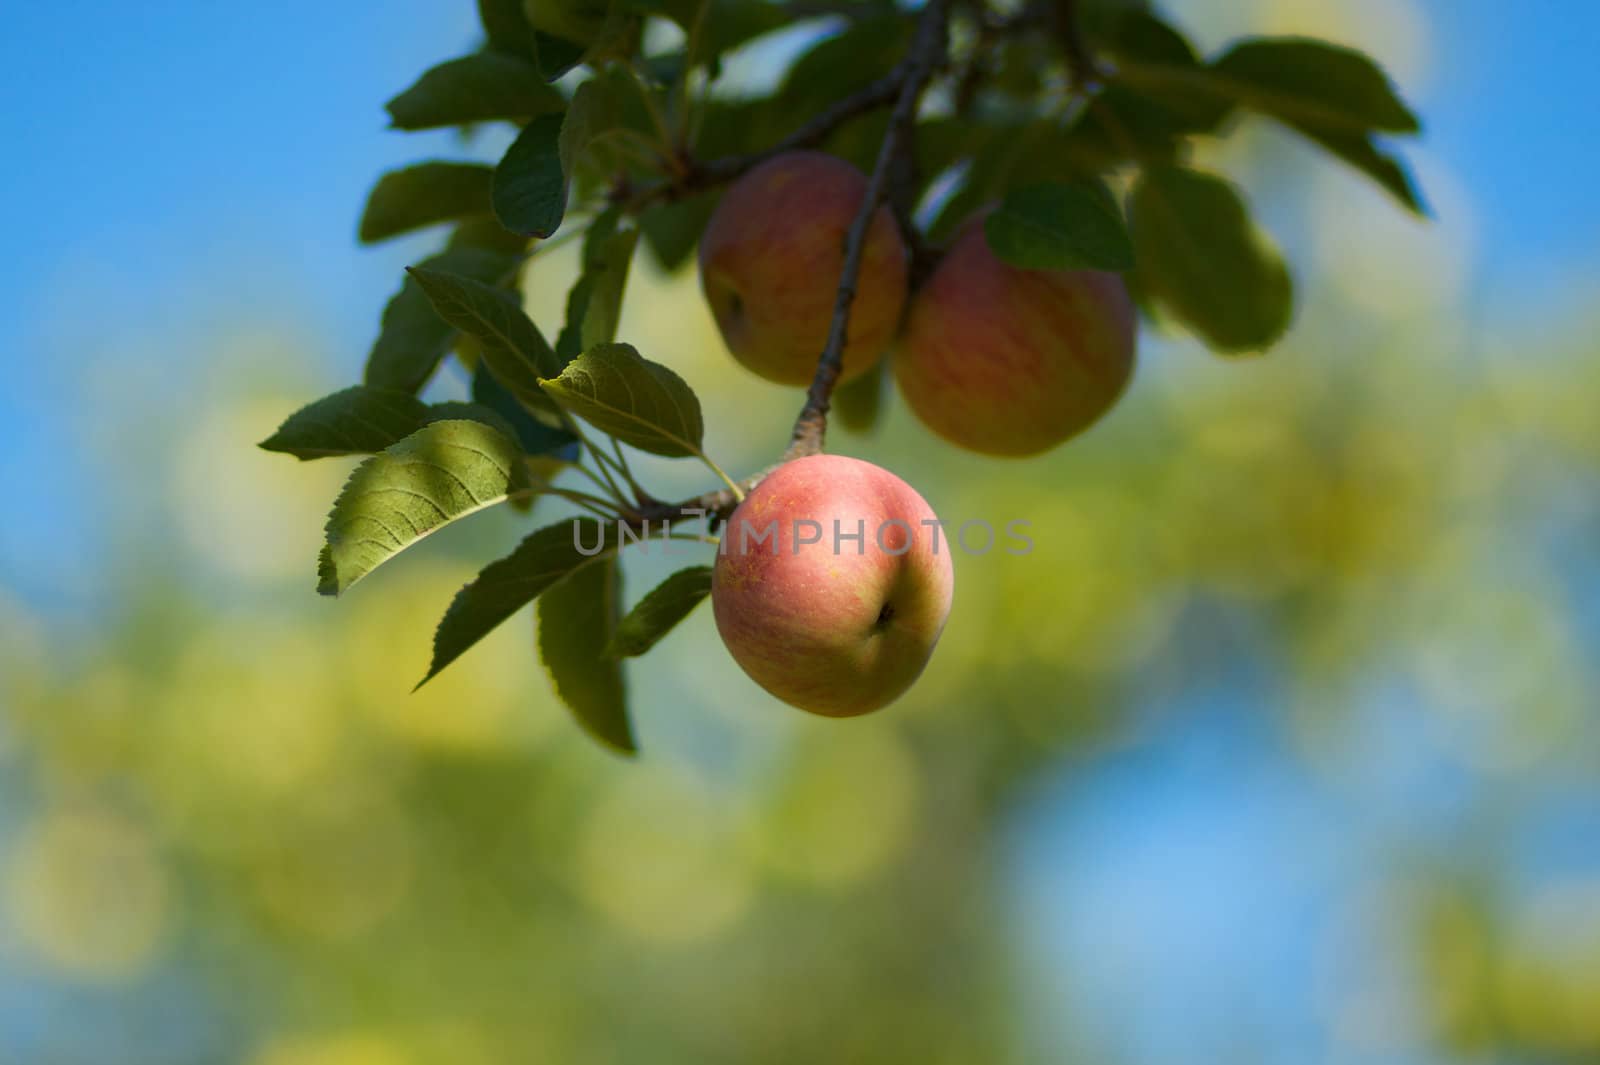 Red apple on branch by bobkeenan